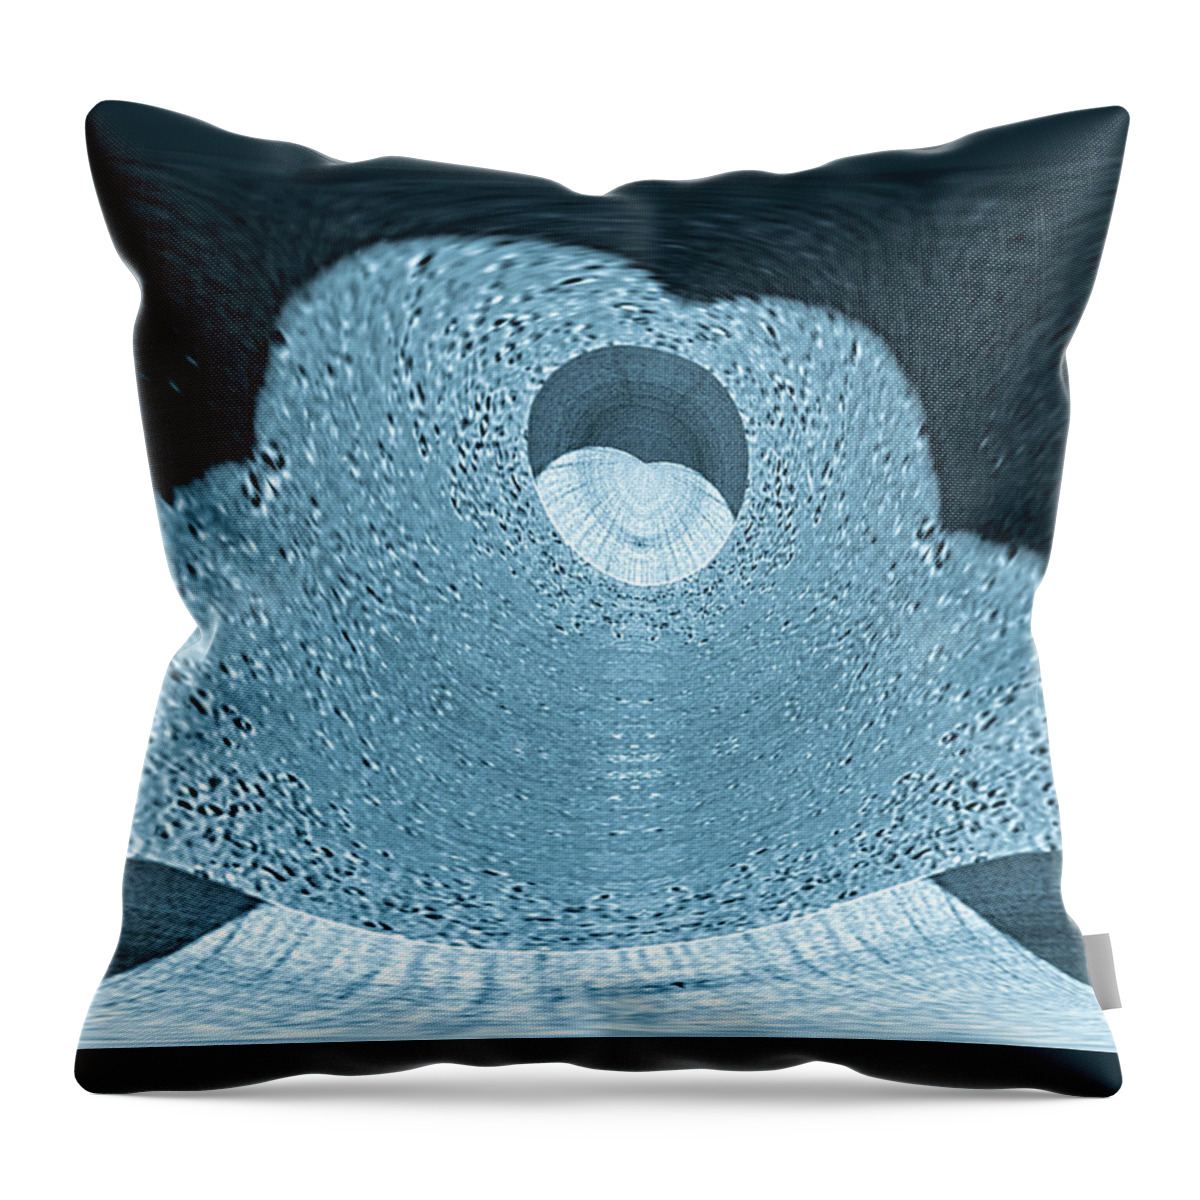 Sea Voyage Throw Pillow featuring the digital art Voyage Series 1 / By Moonlight by Dolores Kaufman